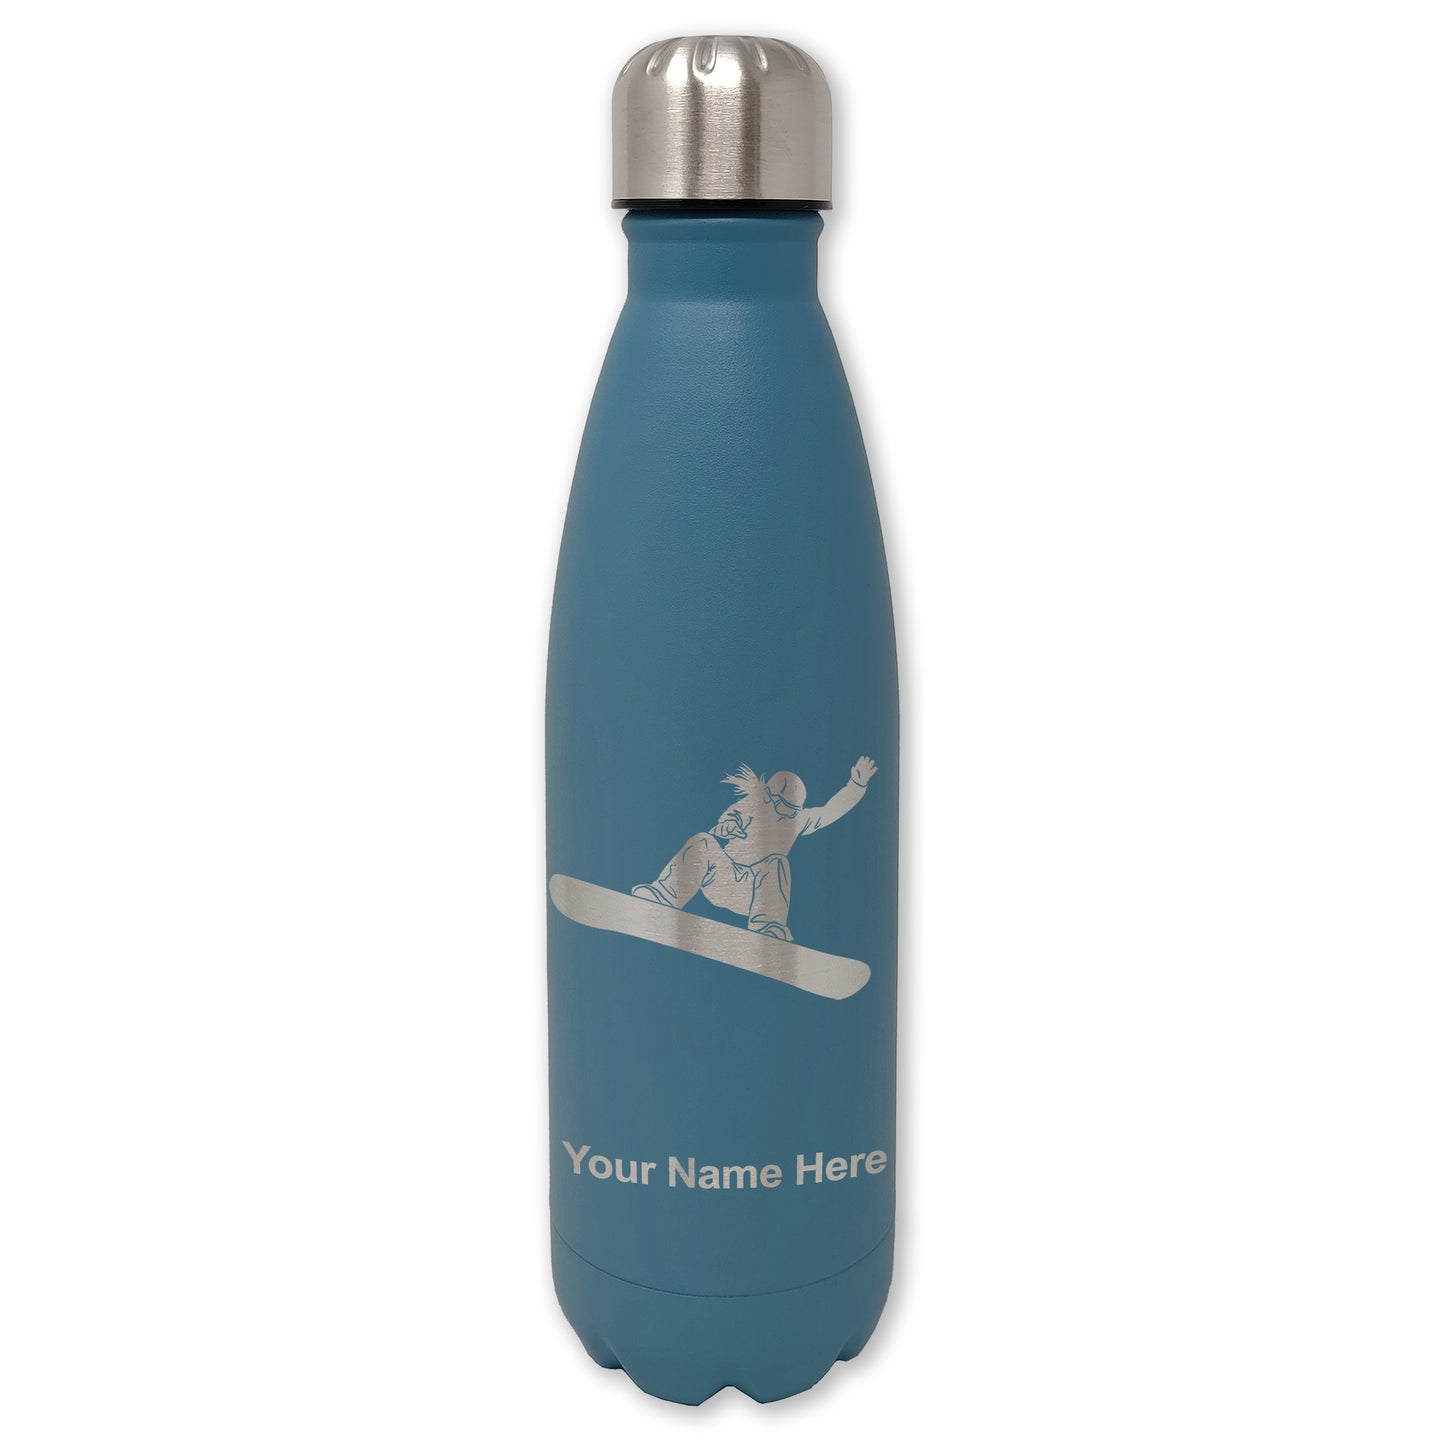 LaserGram Double Wall Water Bottle, Snowboarder Woman, Personalized Engraving Included